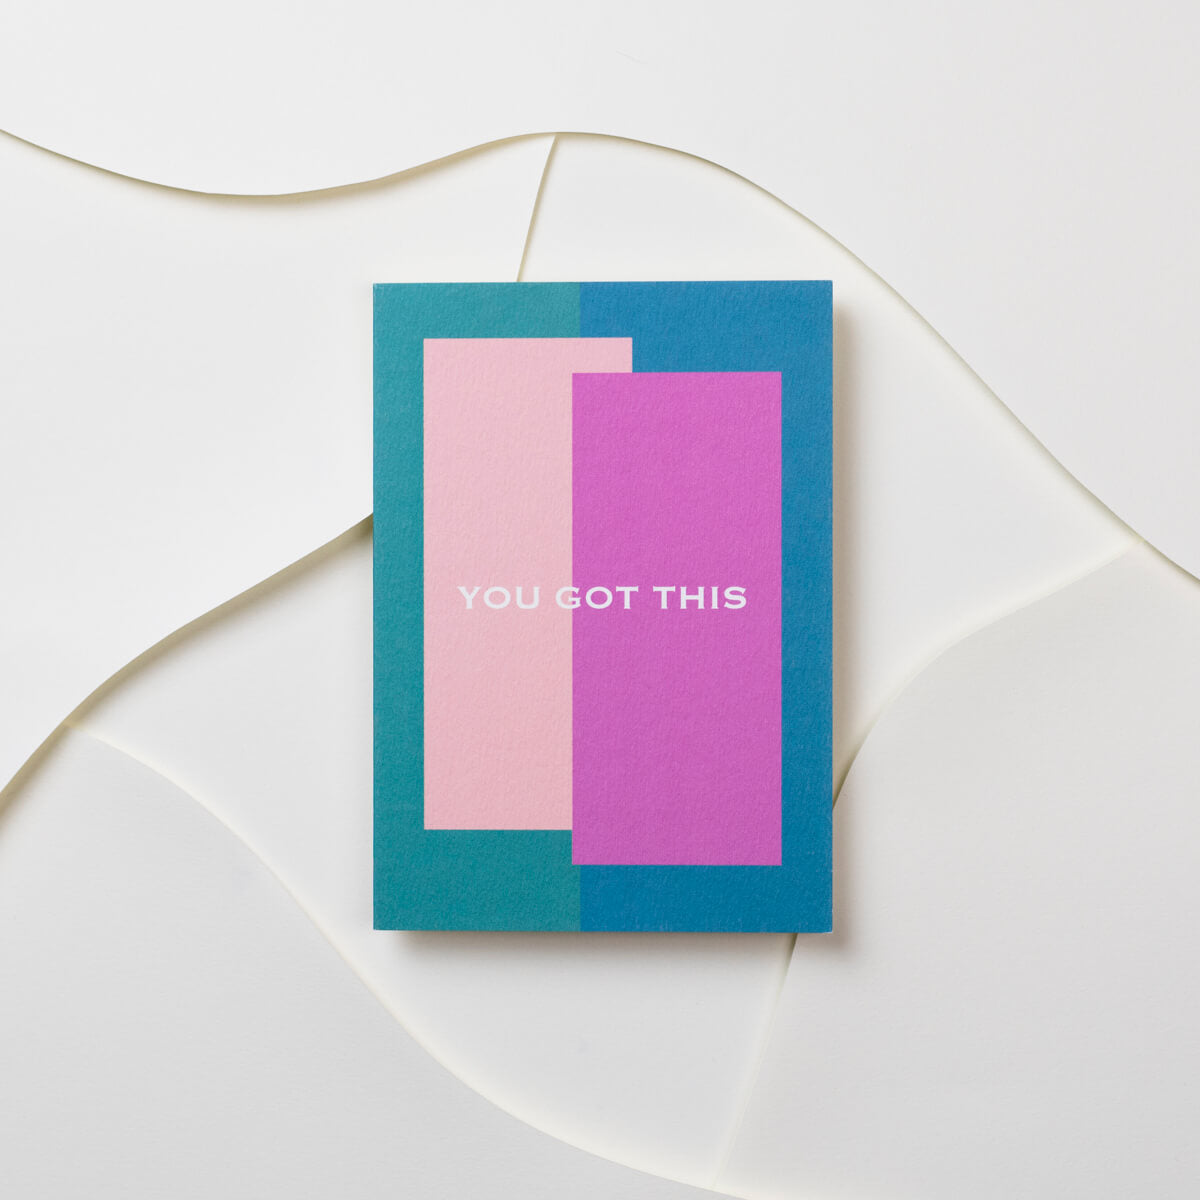 You Got This - The Design Palette